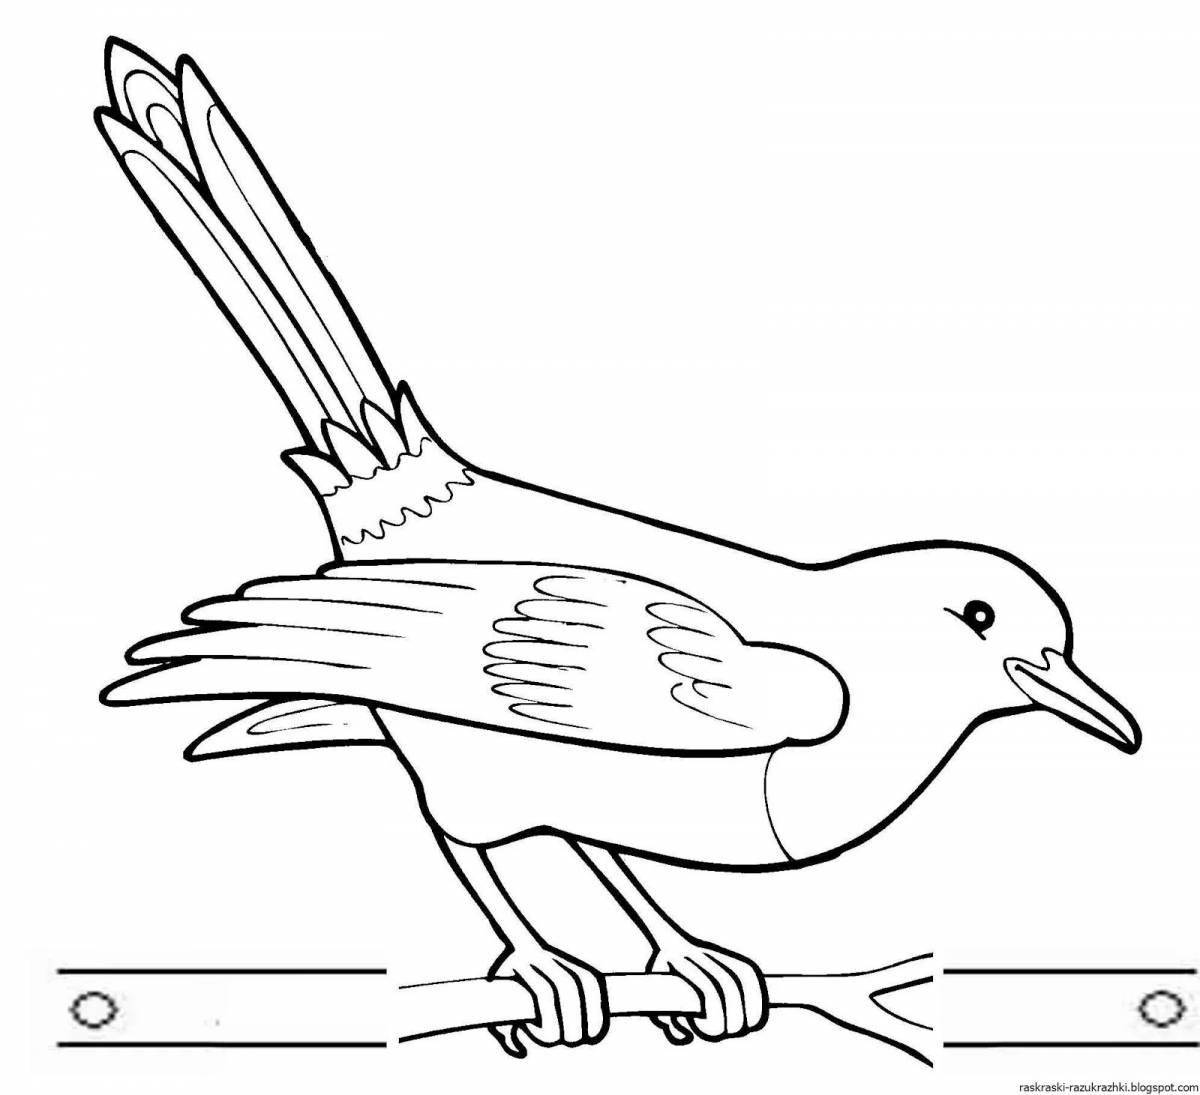 Exquisite magpie coloring page